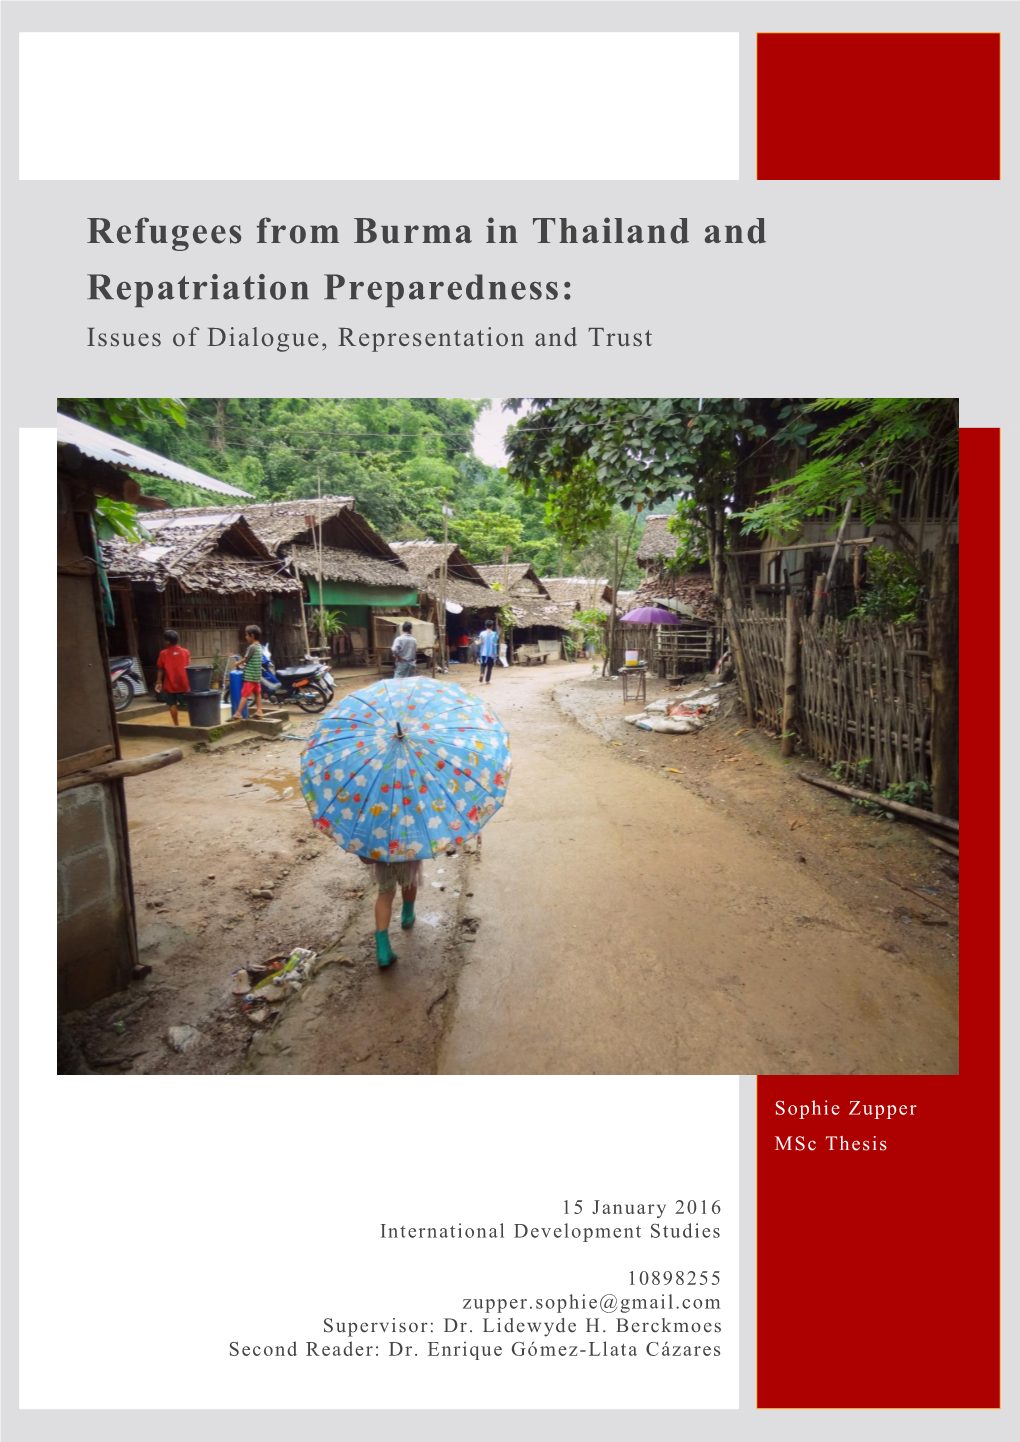 Refugees from Burma in Thailand and Repatriation Preparedness: Issues of Dialogue, Representation and Trust